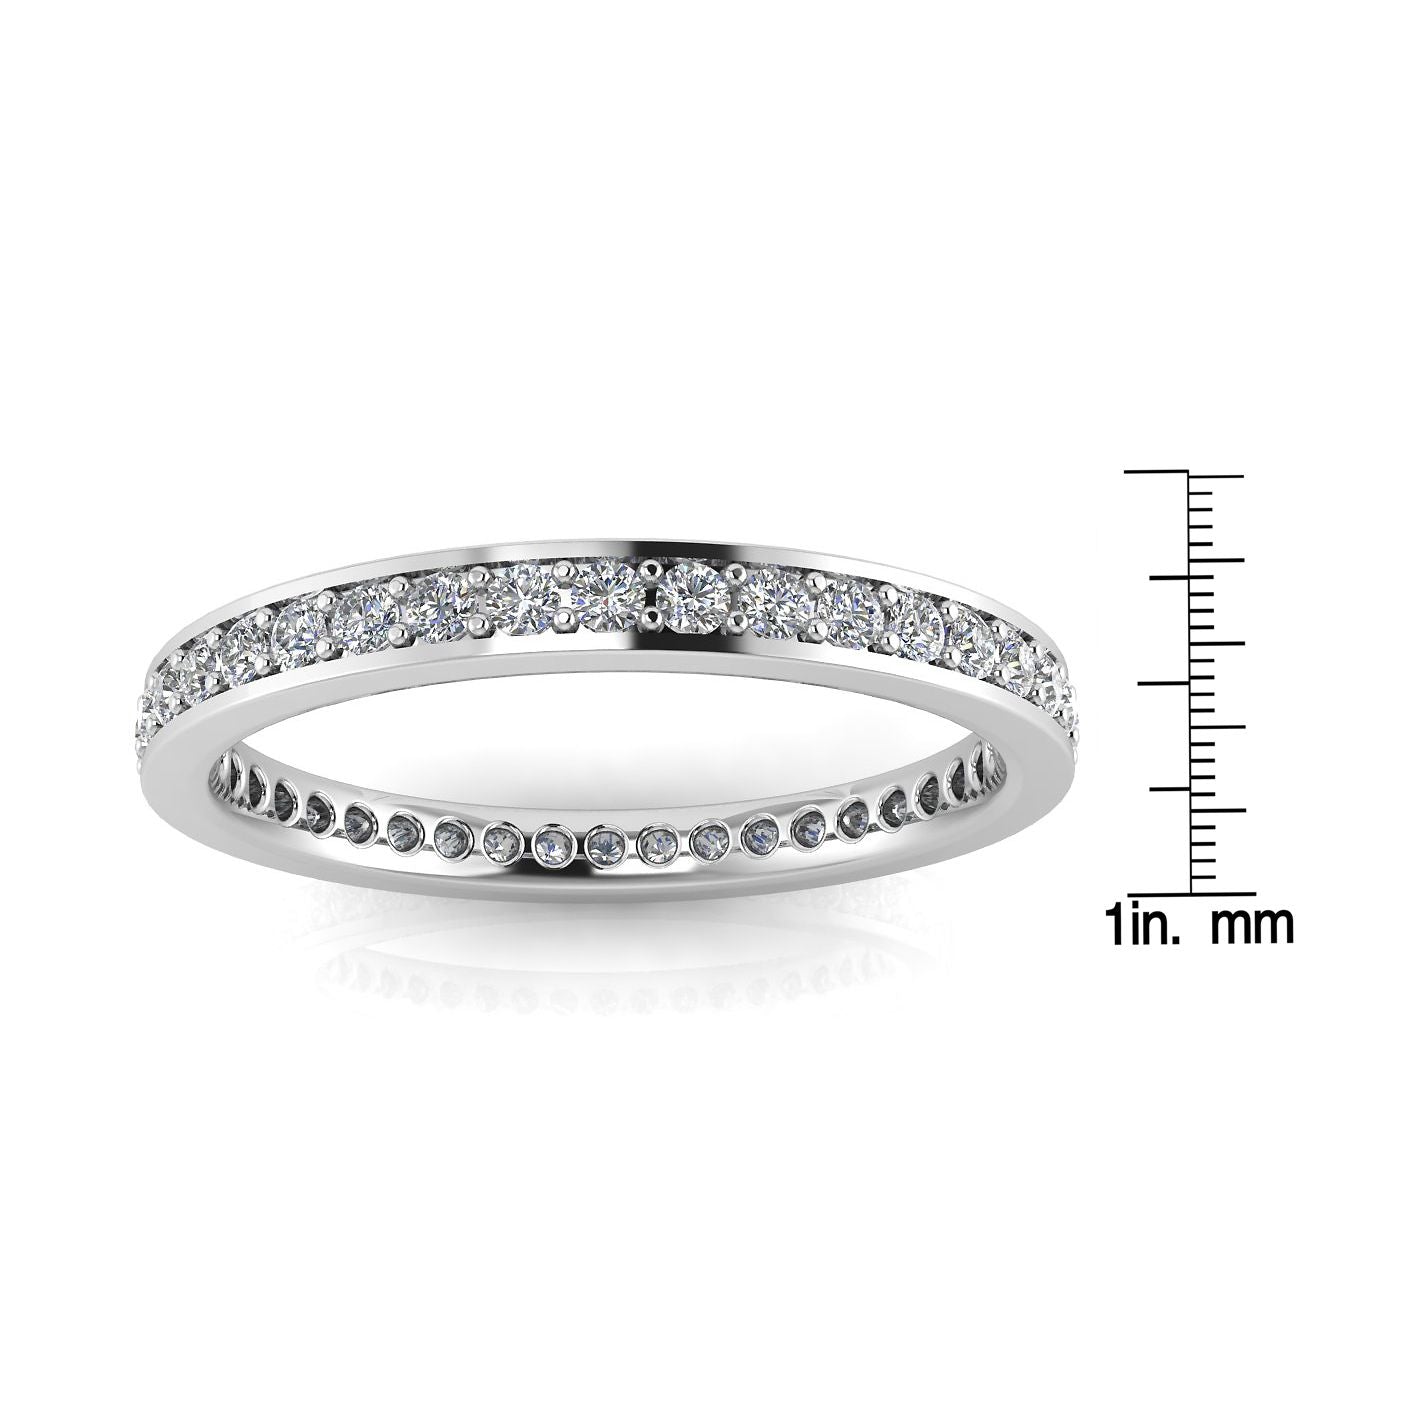 Round Brilliant Cut Diamond Channel Pave Set Eternity Ring In Platinum  (0.45ct. Tw.) Ring Size 4.5